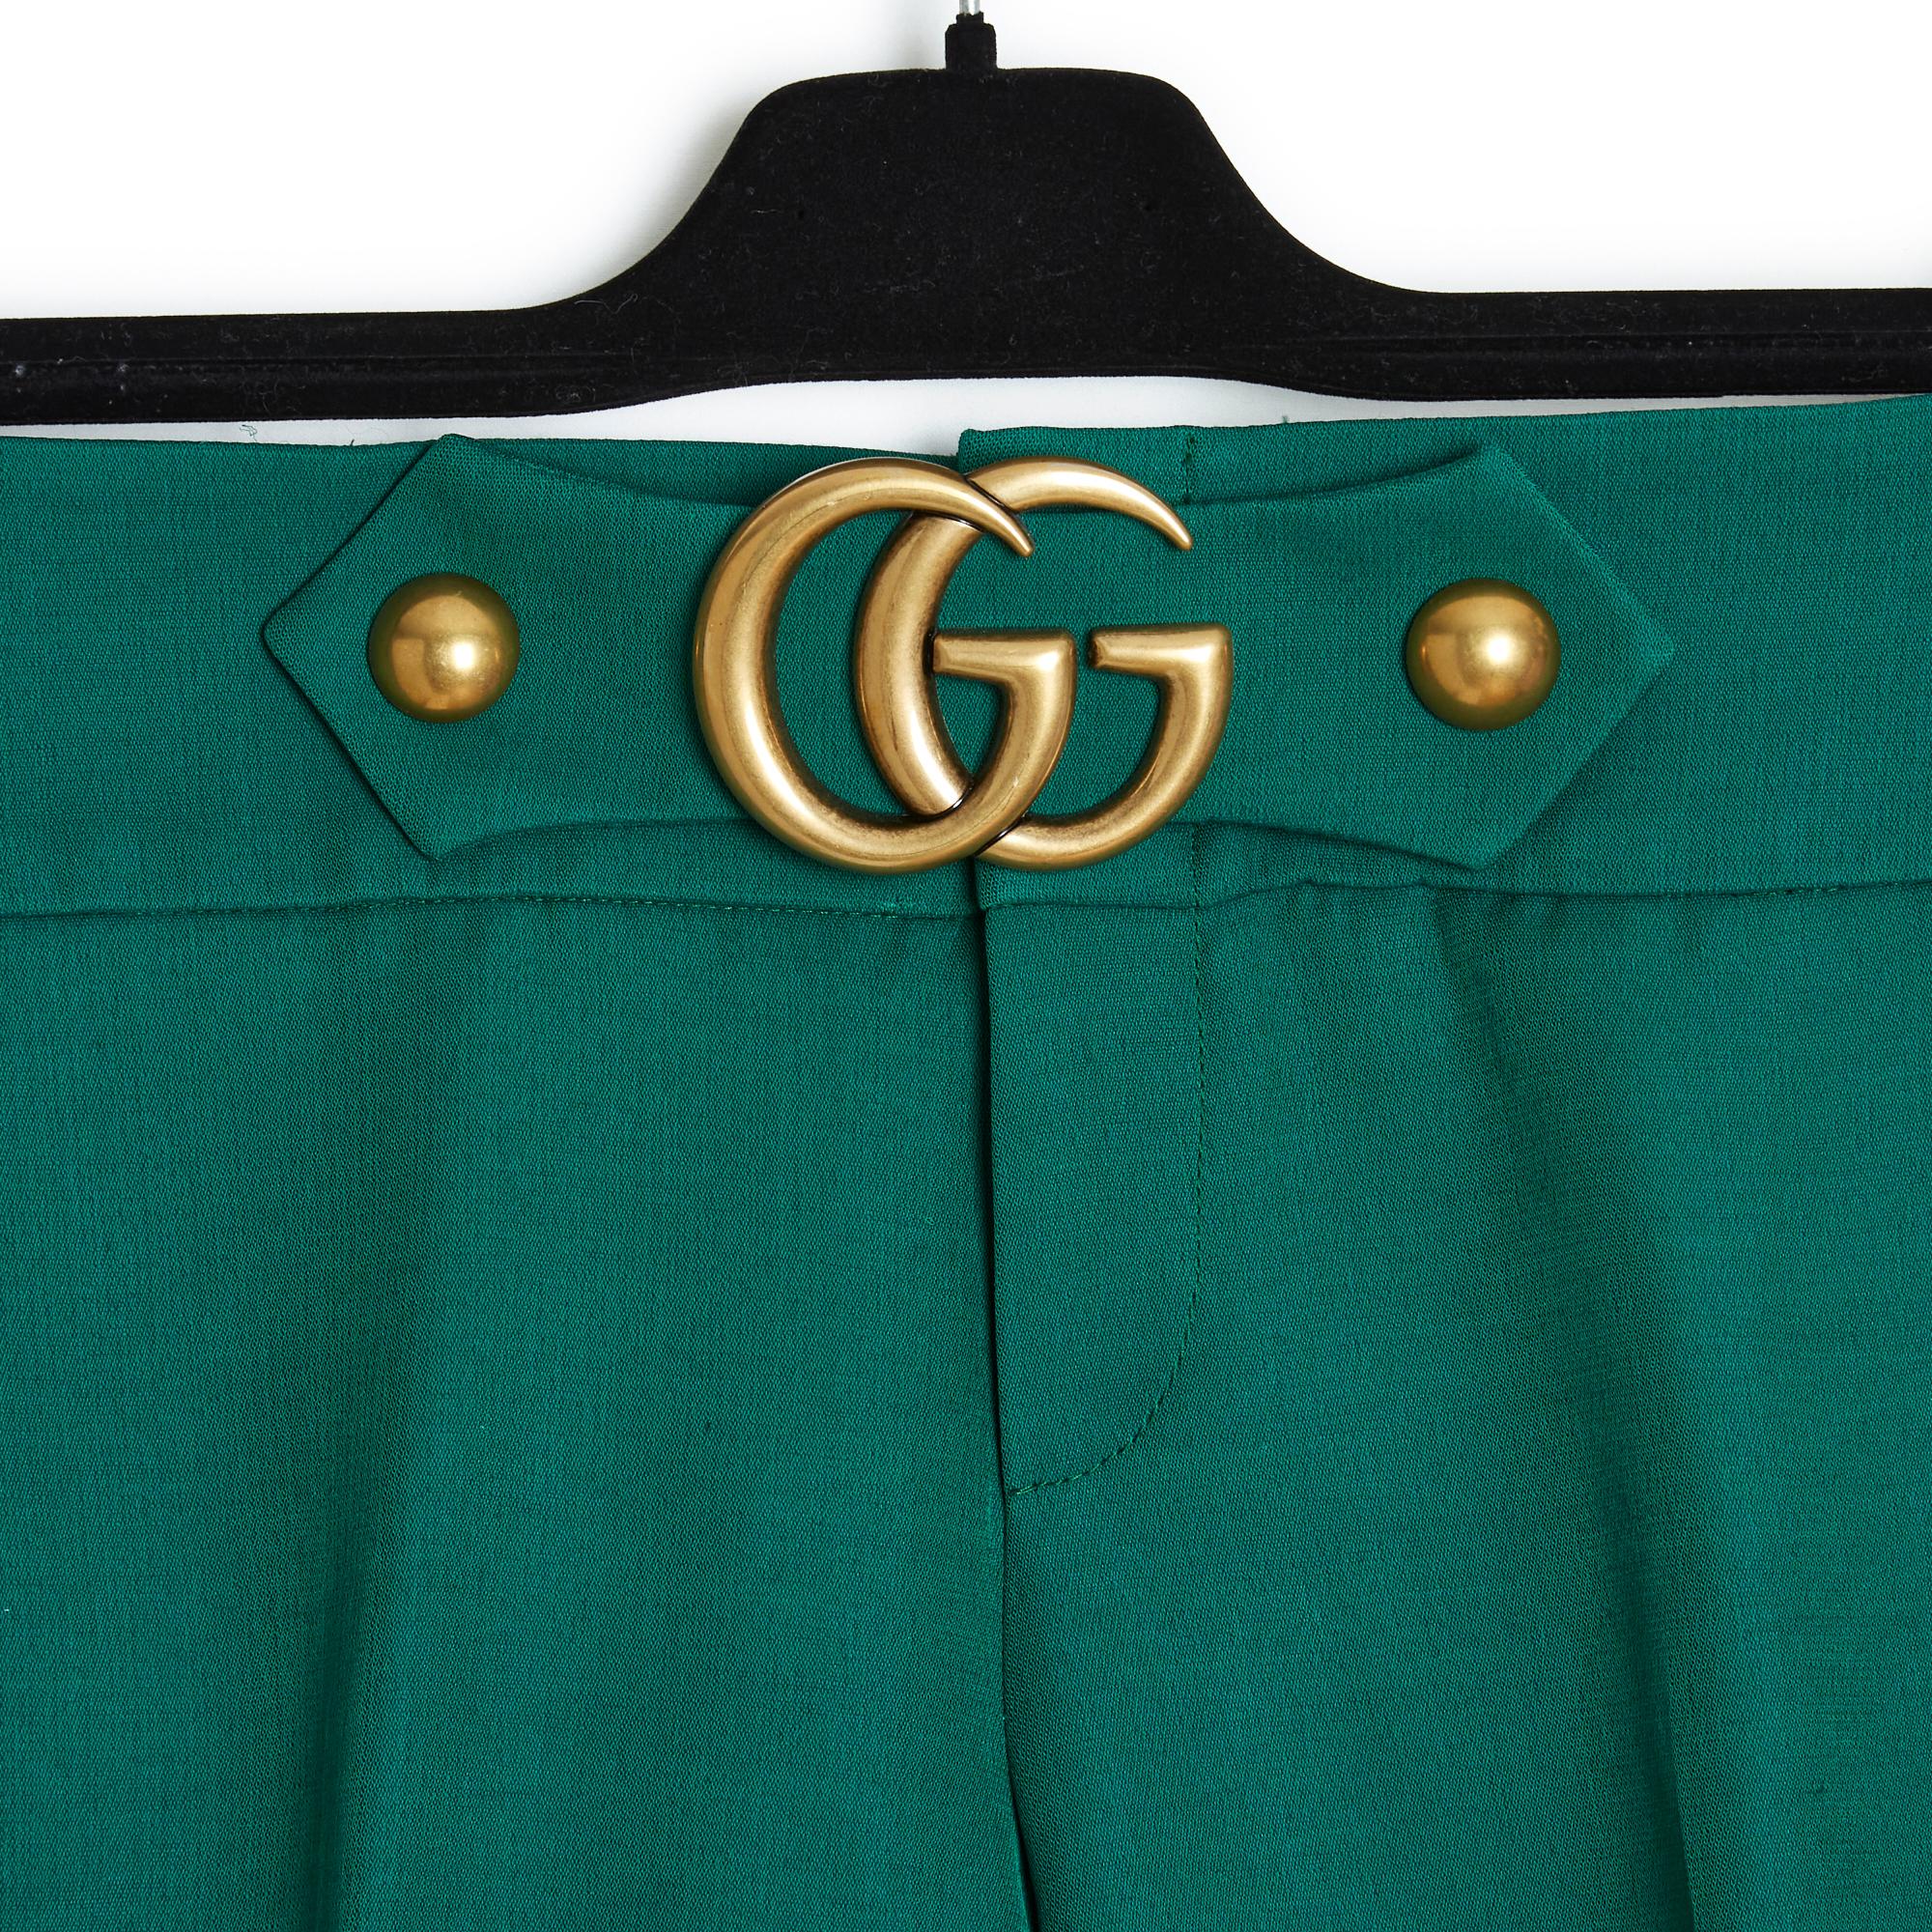 Gucci pants year 2016 by Alessandra Michele in wool twill (58%) and green silk, low waist decorated with a GG buckle in gold metal, mid-wide leg at the top and slightly flared at the bottom, ankle length. Size 44IT or 40FR: waist 43 cm, crotch 23